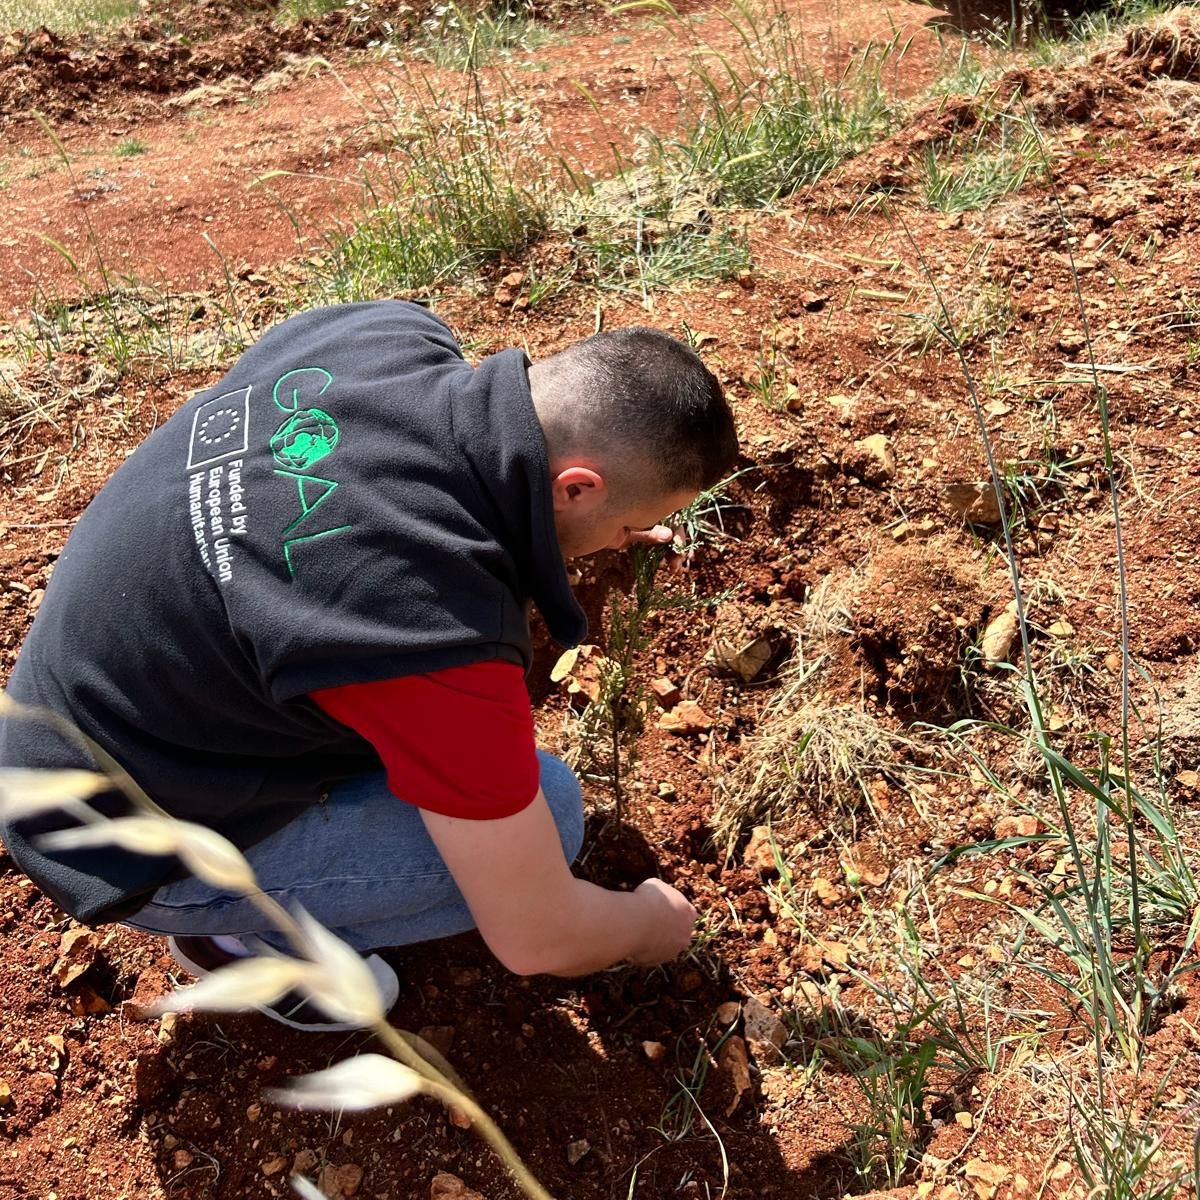 This week, GOAL Türkiye marked #EarthDay with a sapling planting ceremony in Hatay. With support from @eu_echo, GOAL is implementing protection interventions for nomadic agricultural communities whose livelihoods are jeopardised by climate change and environmental challenges.